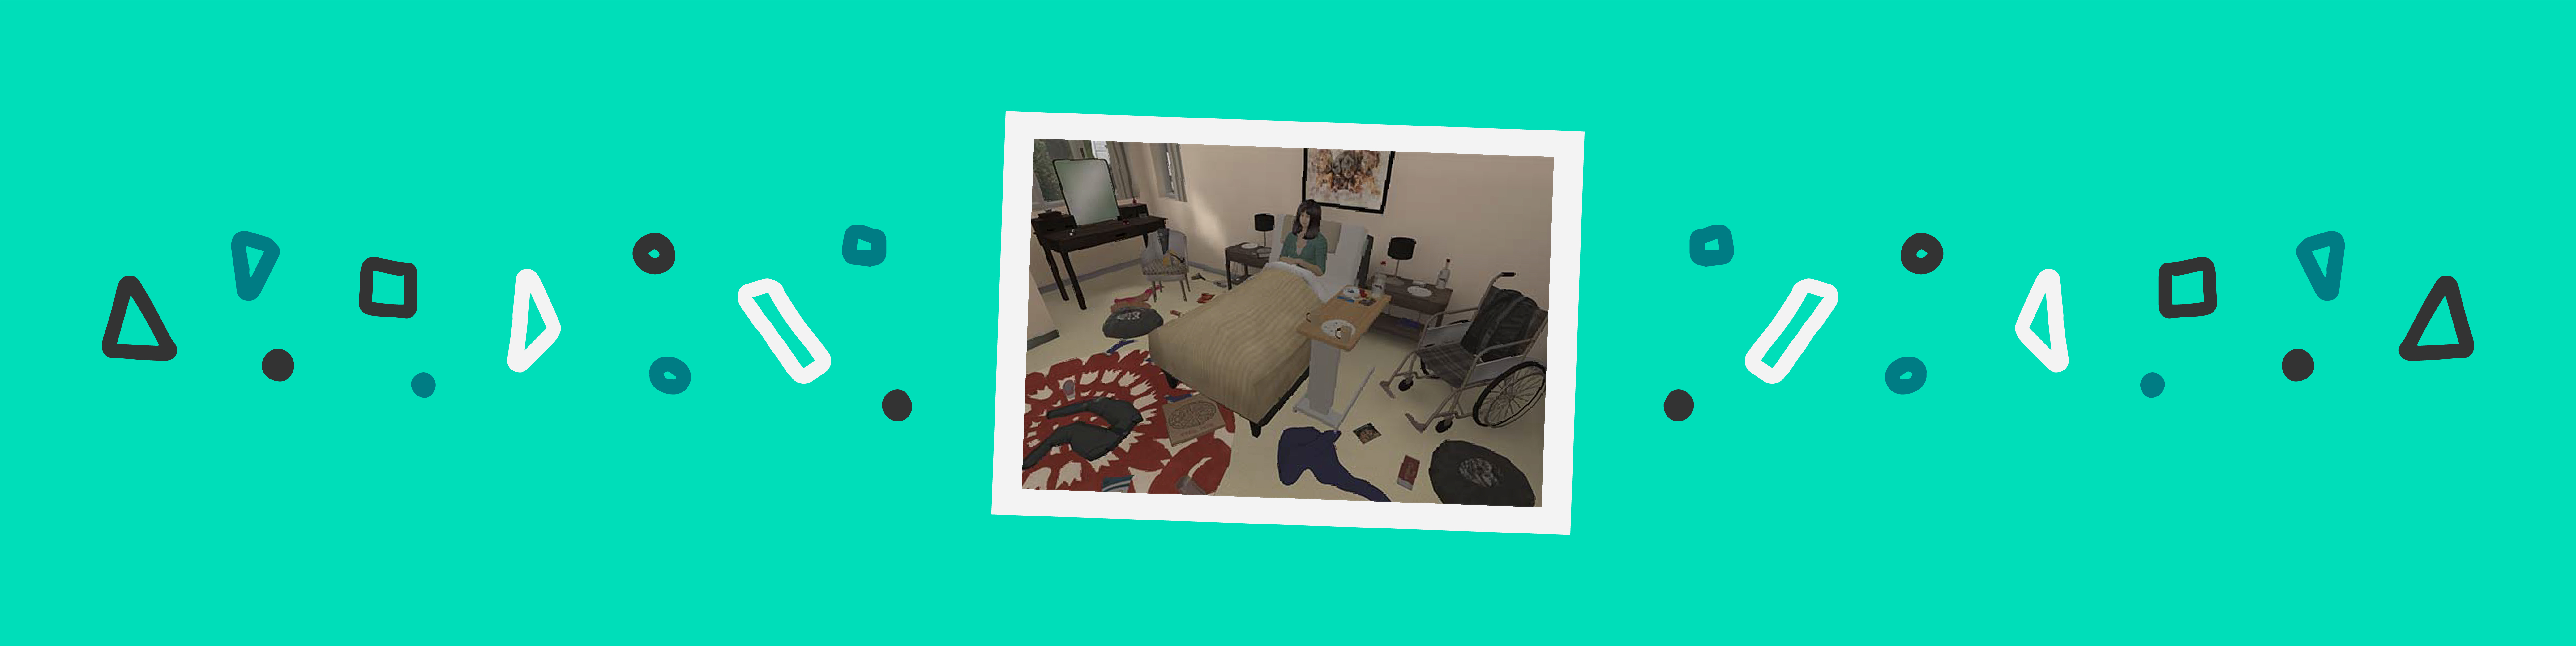 snapshot of a virtual environment caring for a patient in a domestic setting